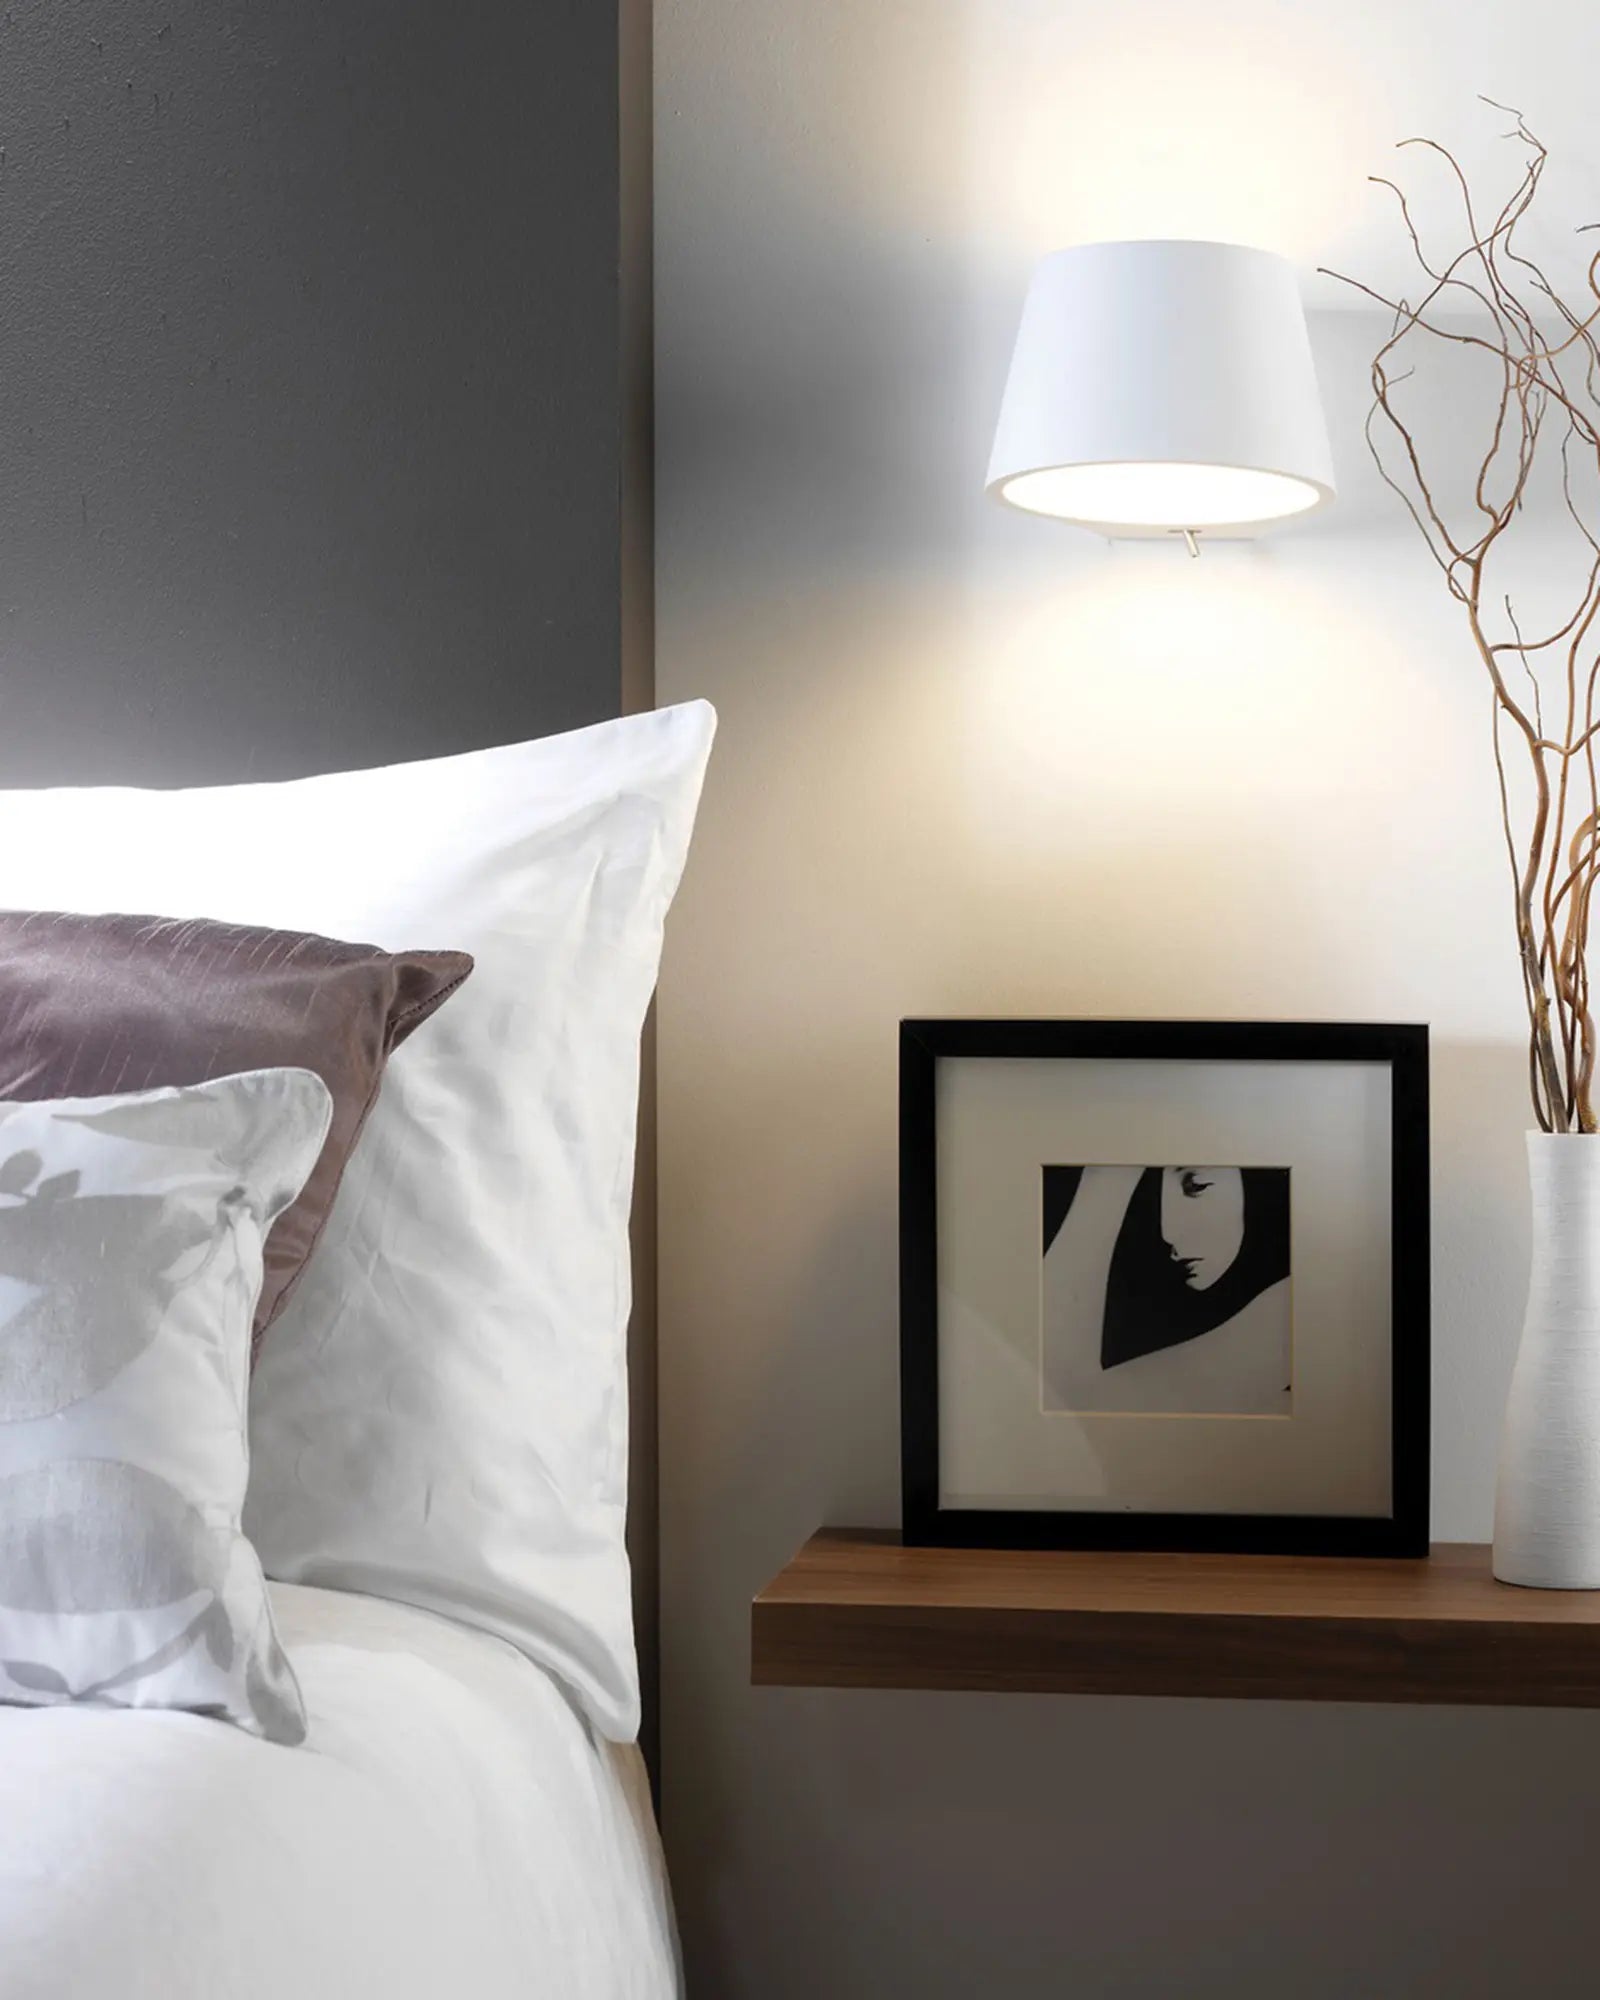 Koza plaster minimalistic contemporary wall light with switch bed side